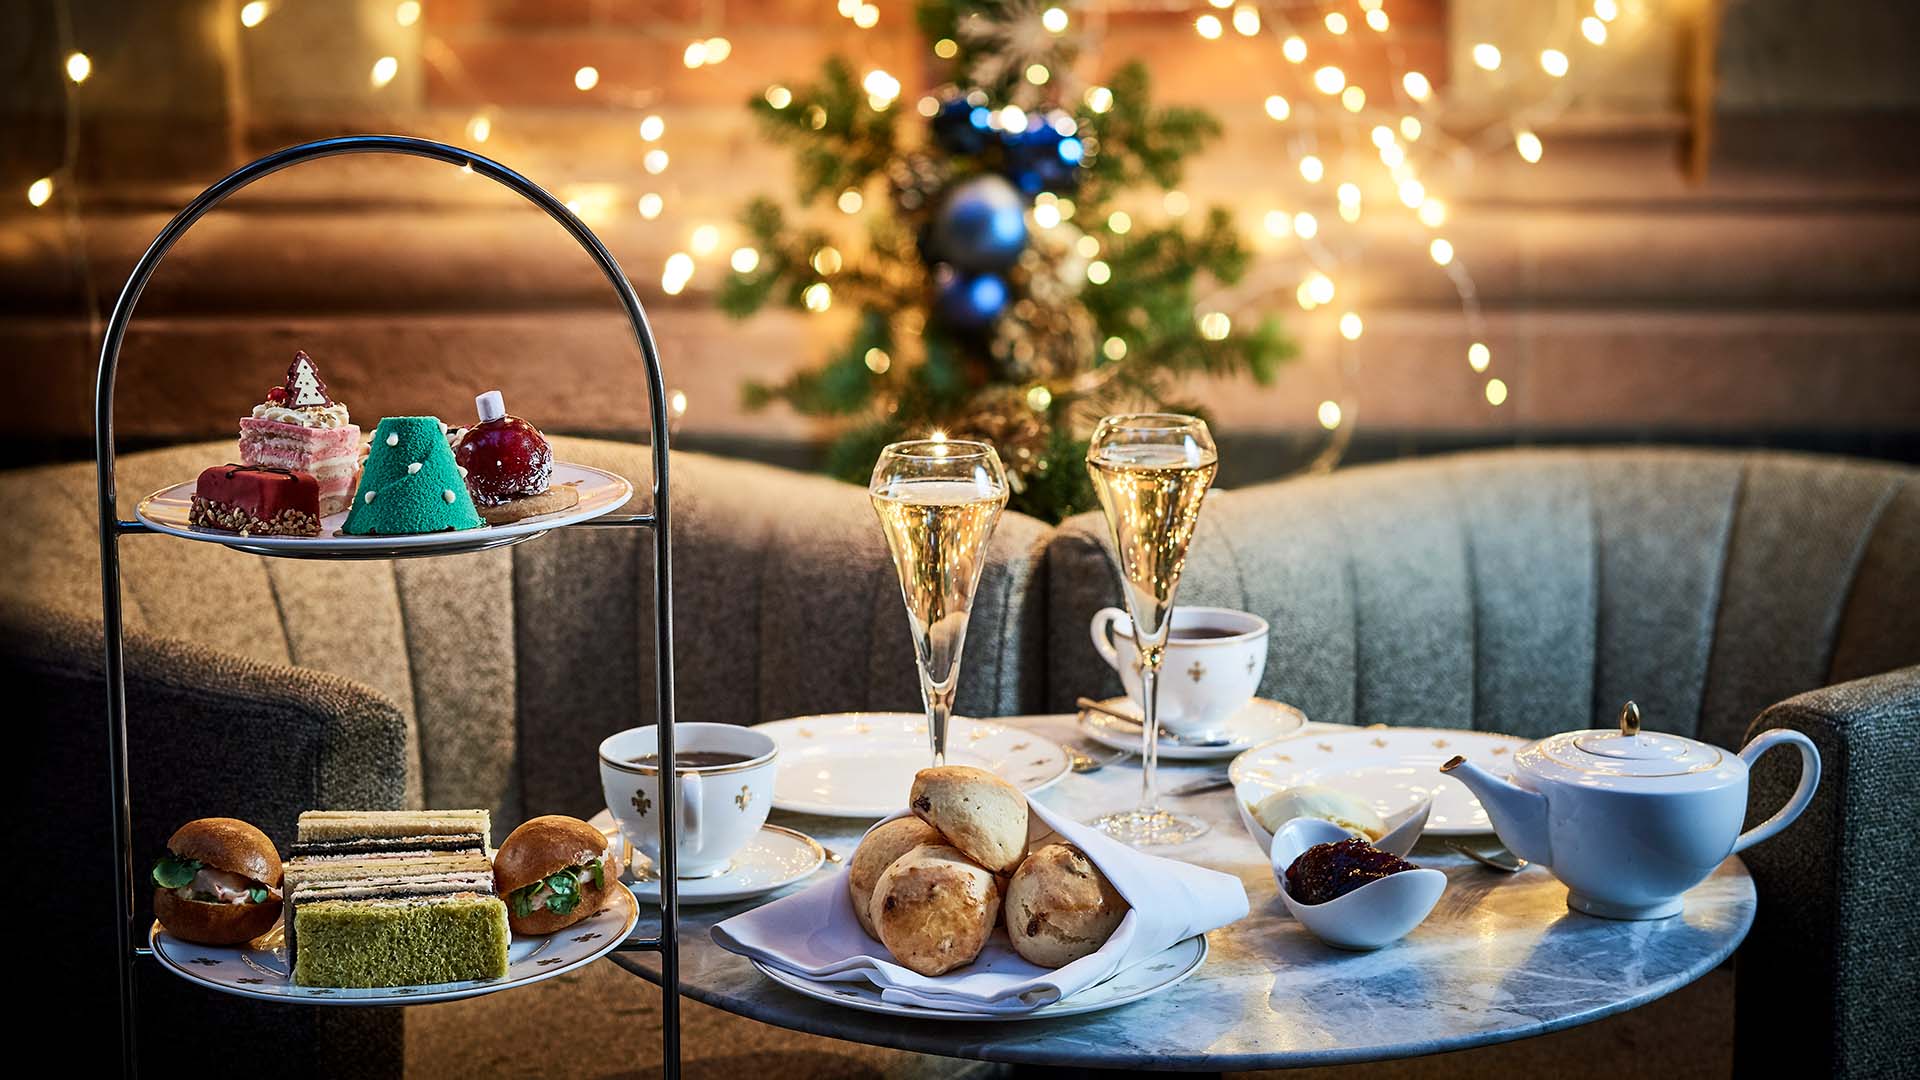 afternoon tea with pastries and Champagne at St. Pancras Renaissance Hotel London